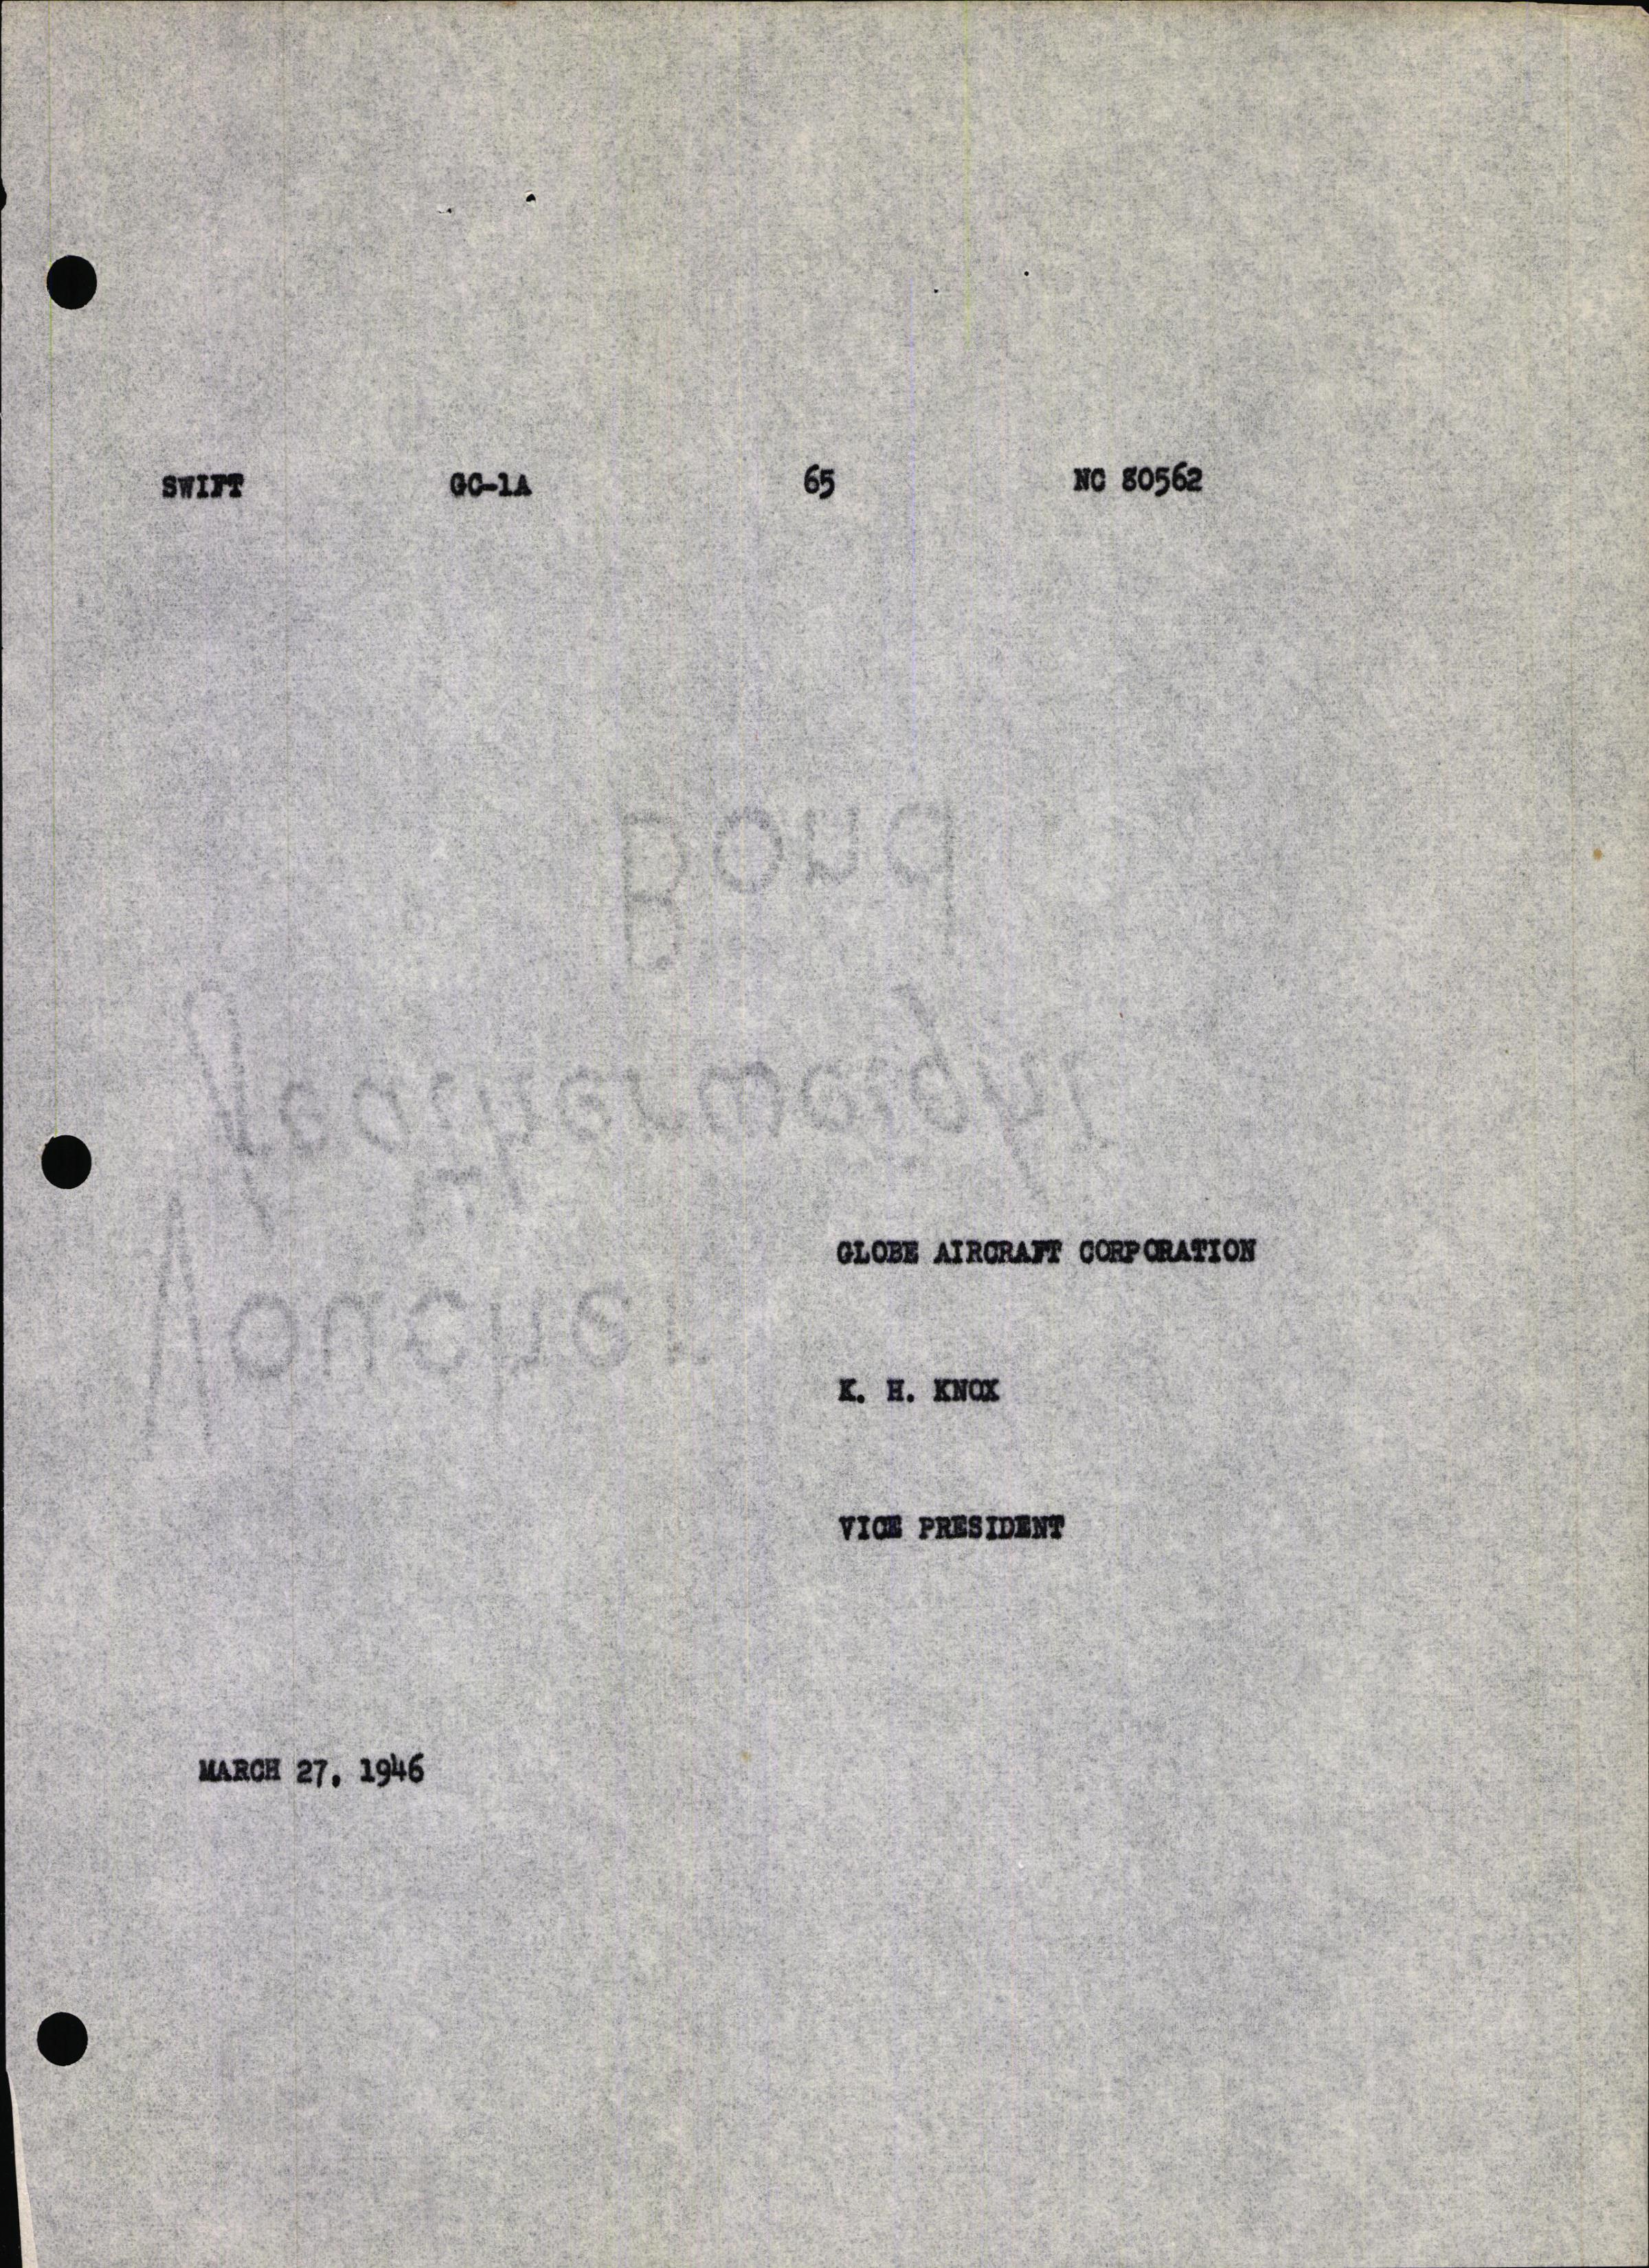 Sample page 7 from AirCorps Library document: Technical Information for Serial Number 65